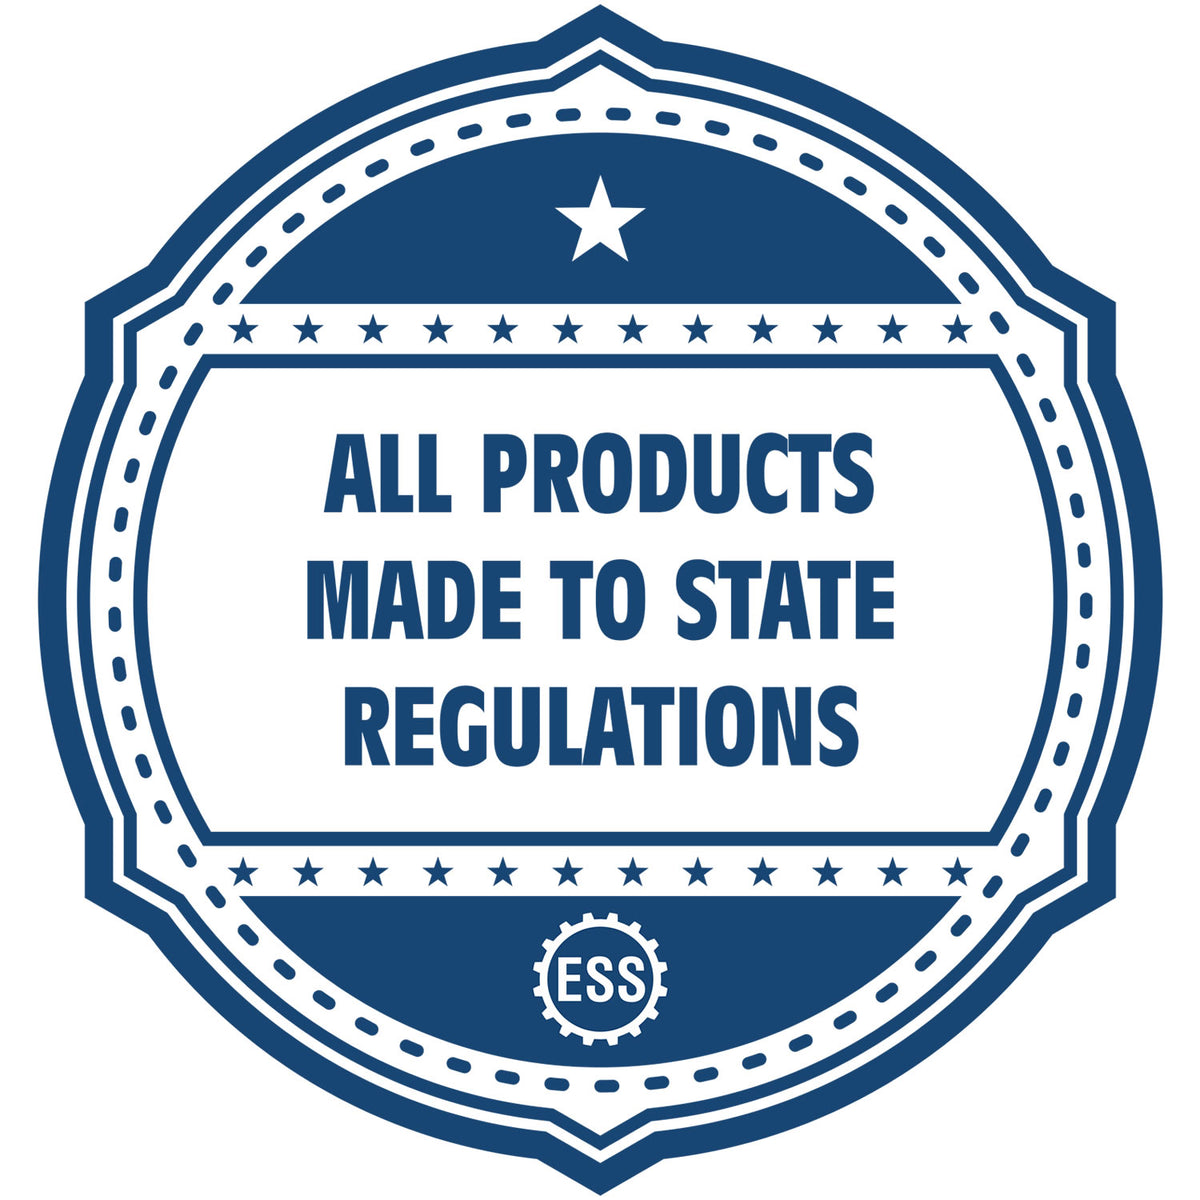 An icon or badge element for the Super Slim South Carolina Notary Public Stamp showing that this product is made in compliance with state regulations.